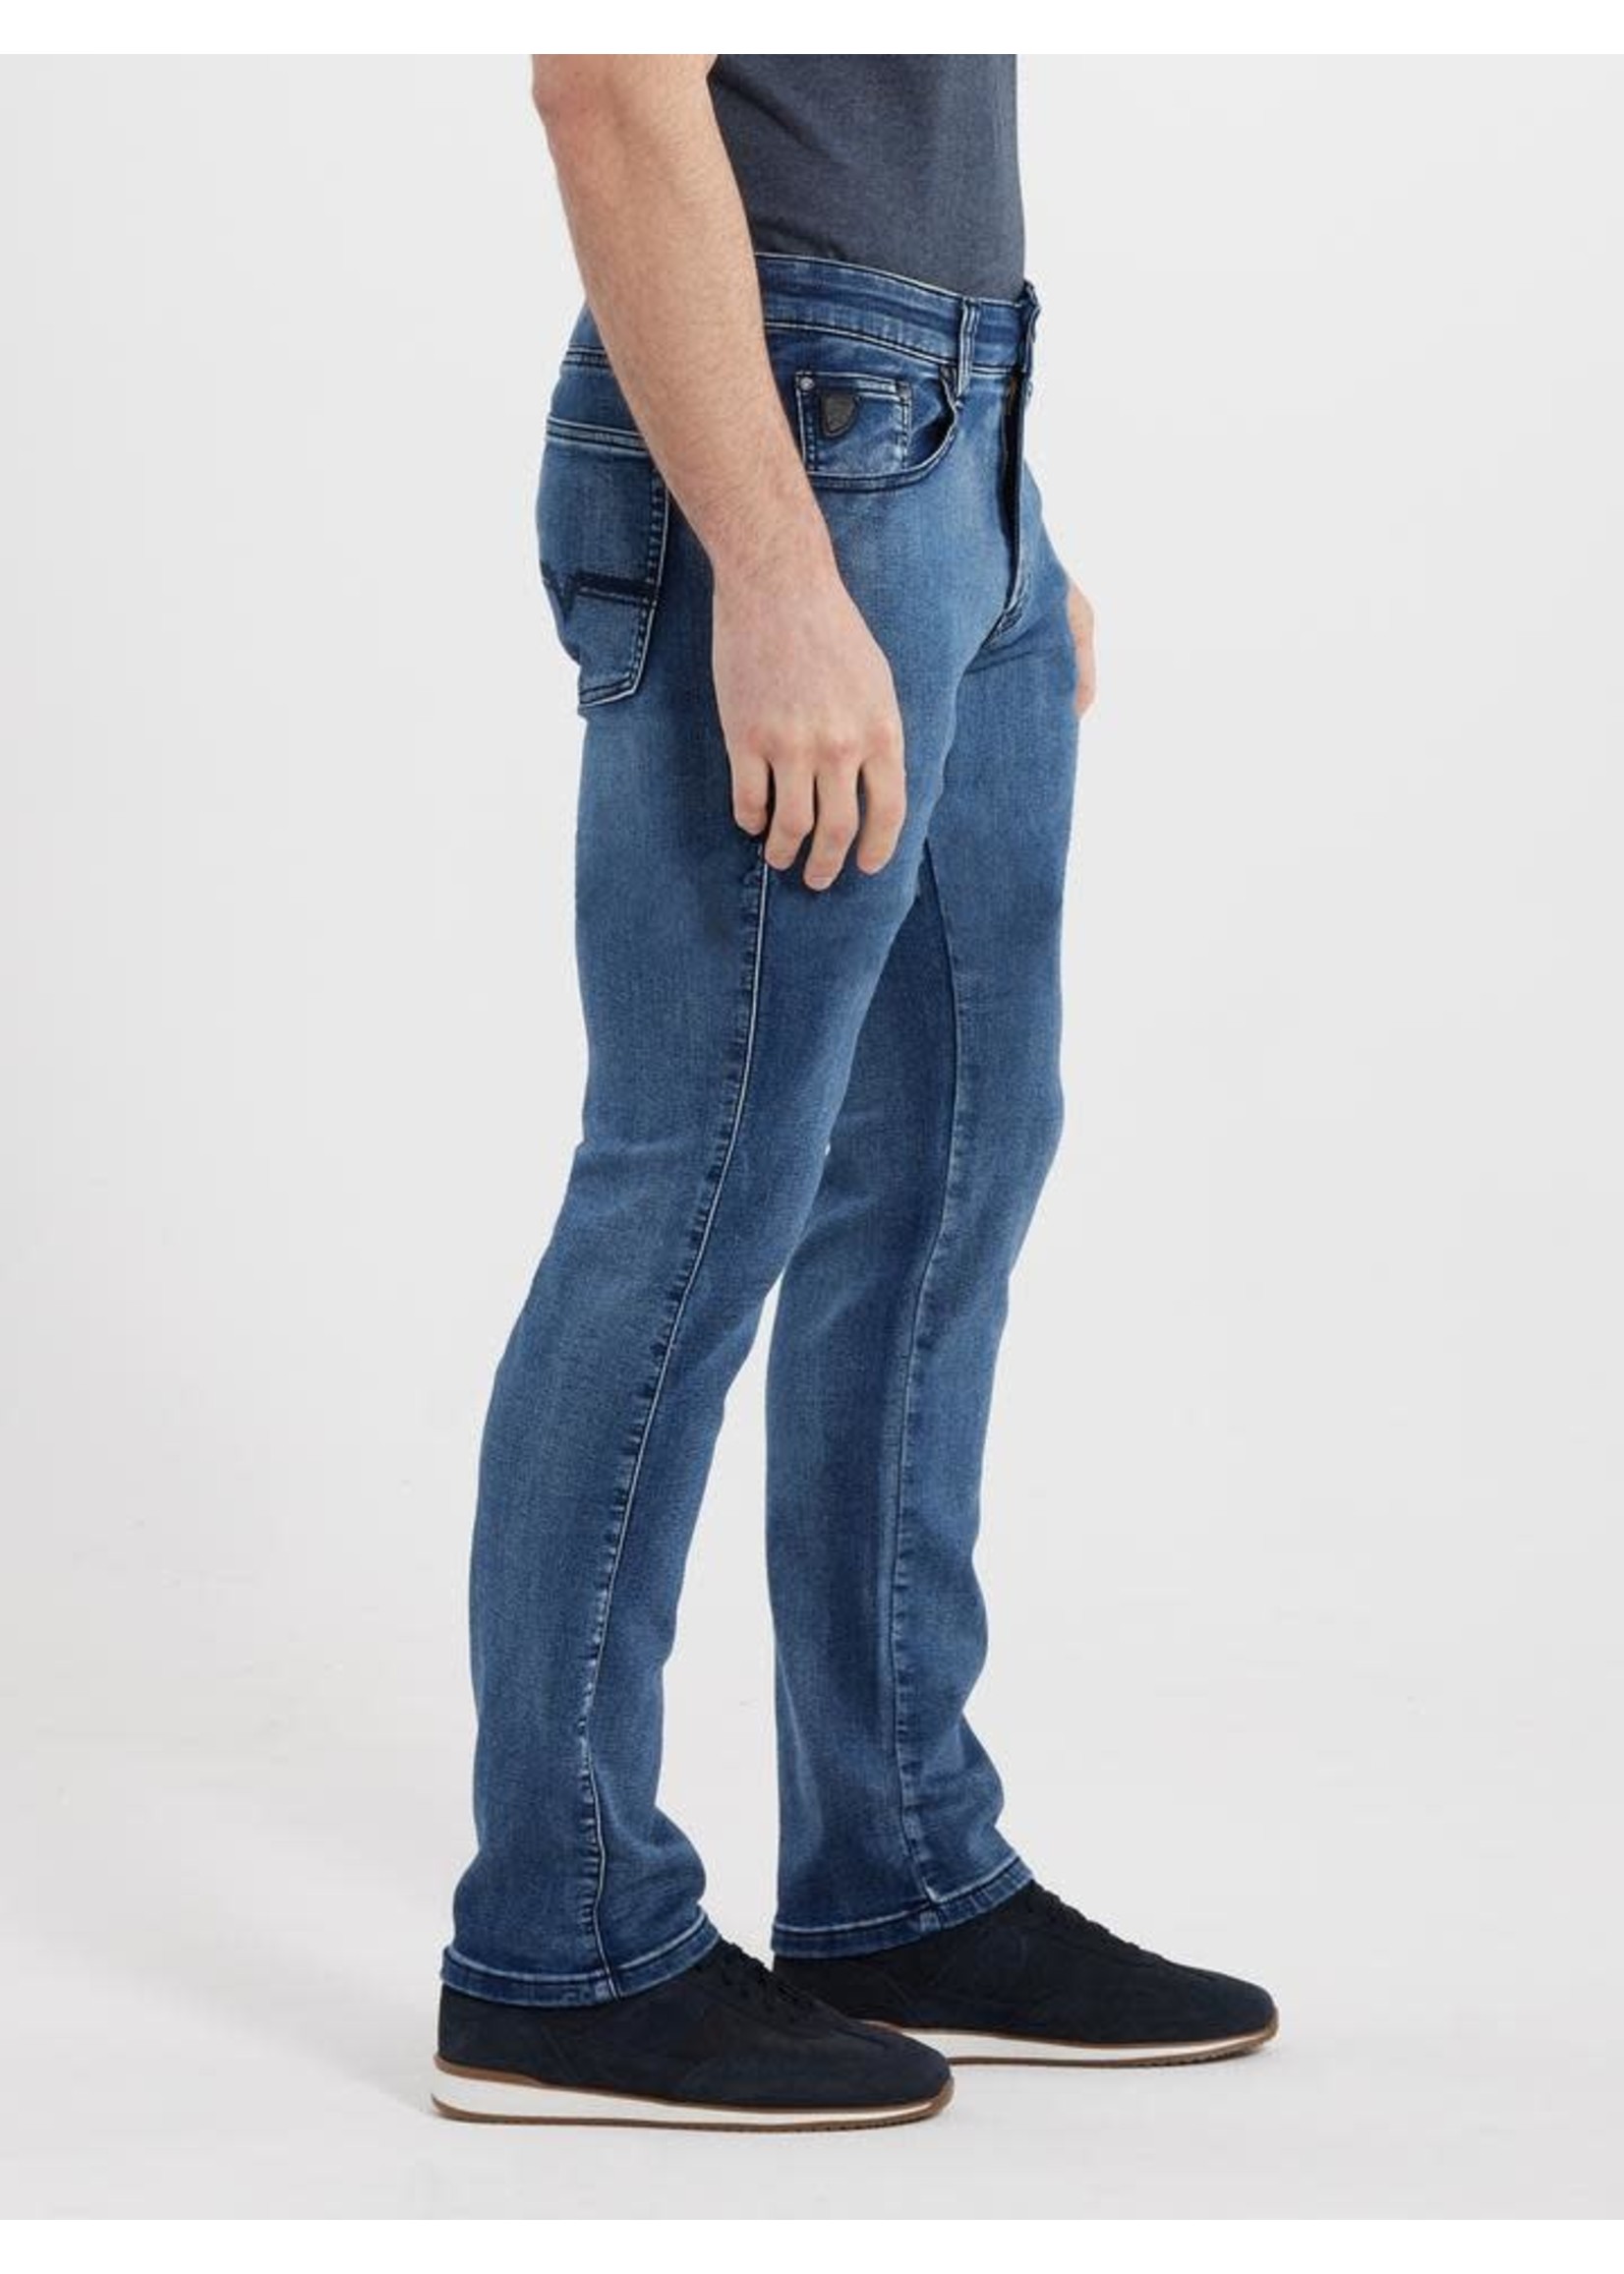 Lois Jeans Canada The "Peter Slim 6500" by Lois Jeans